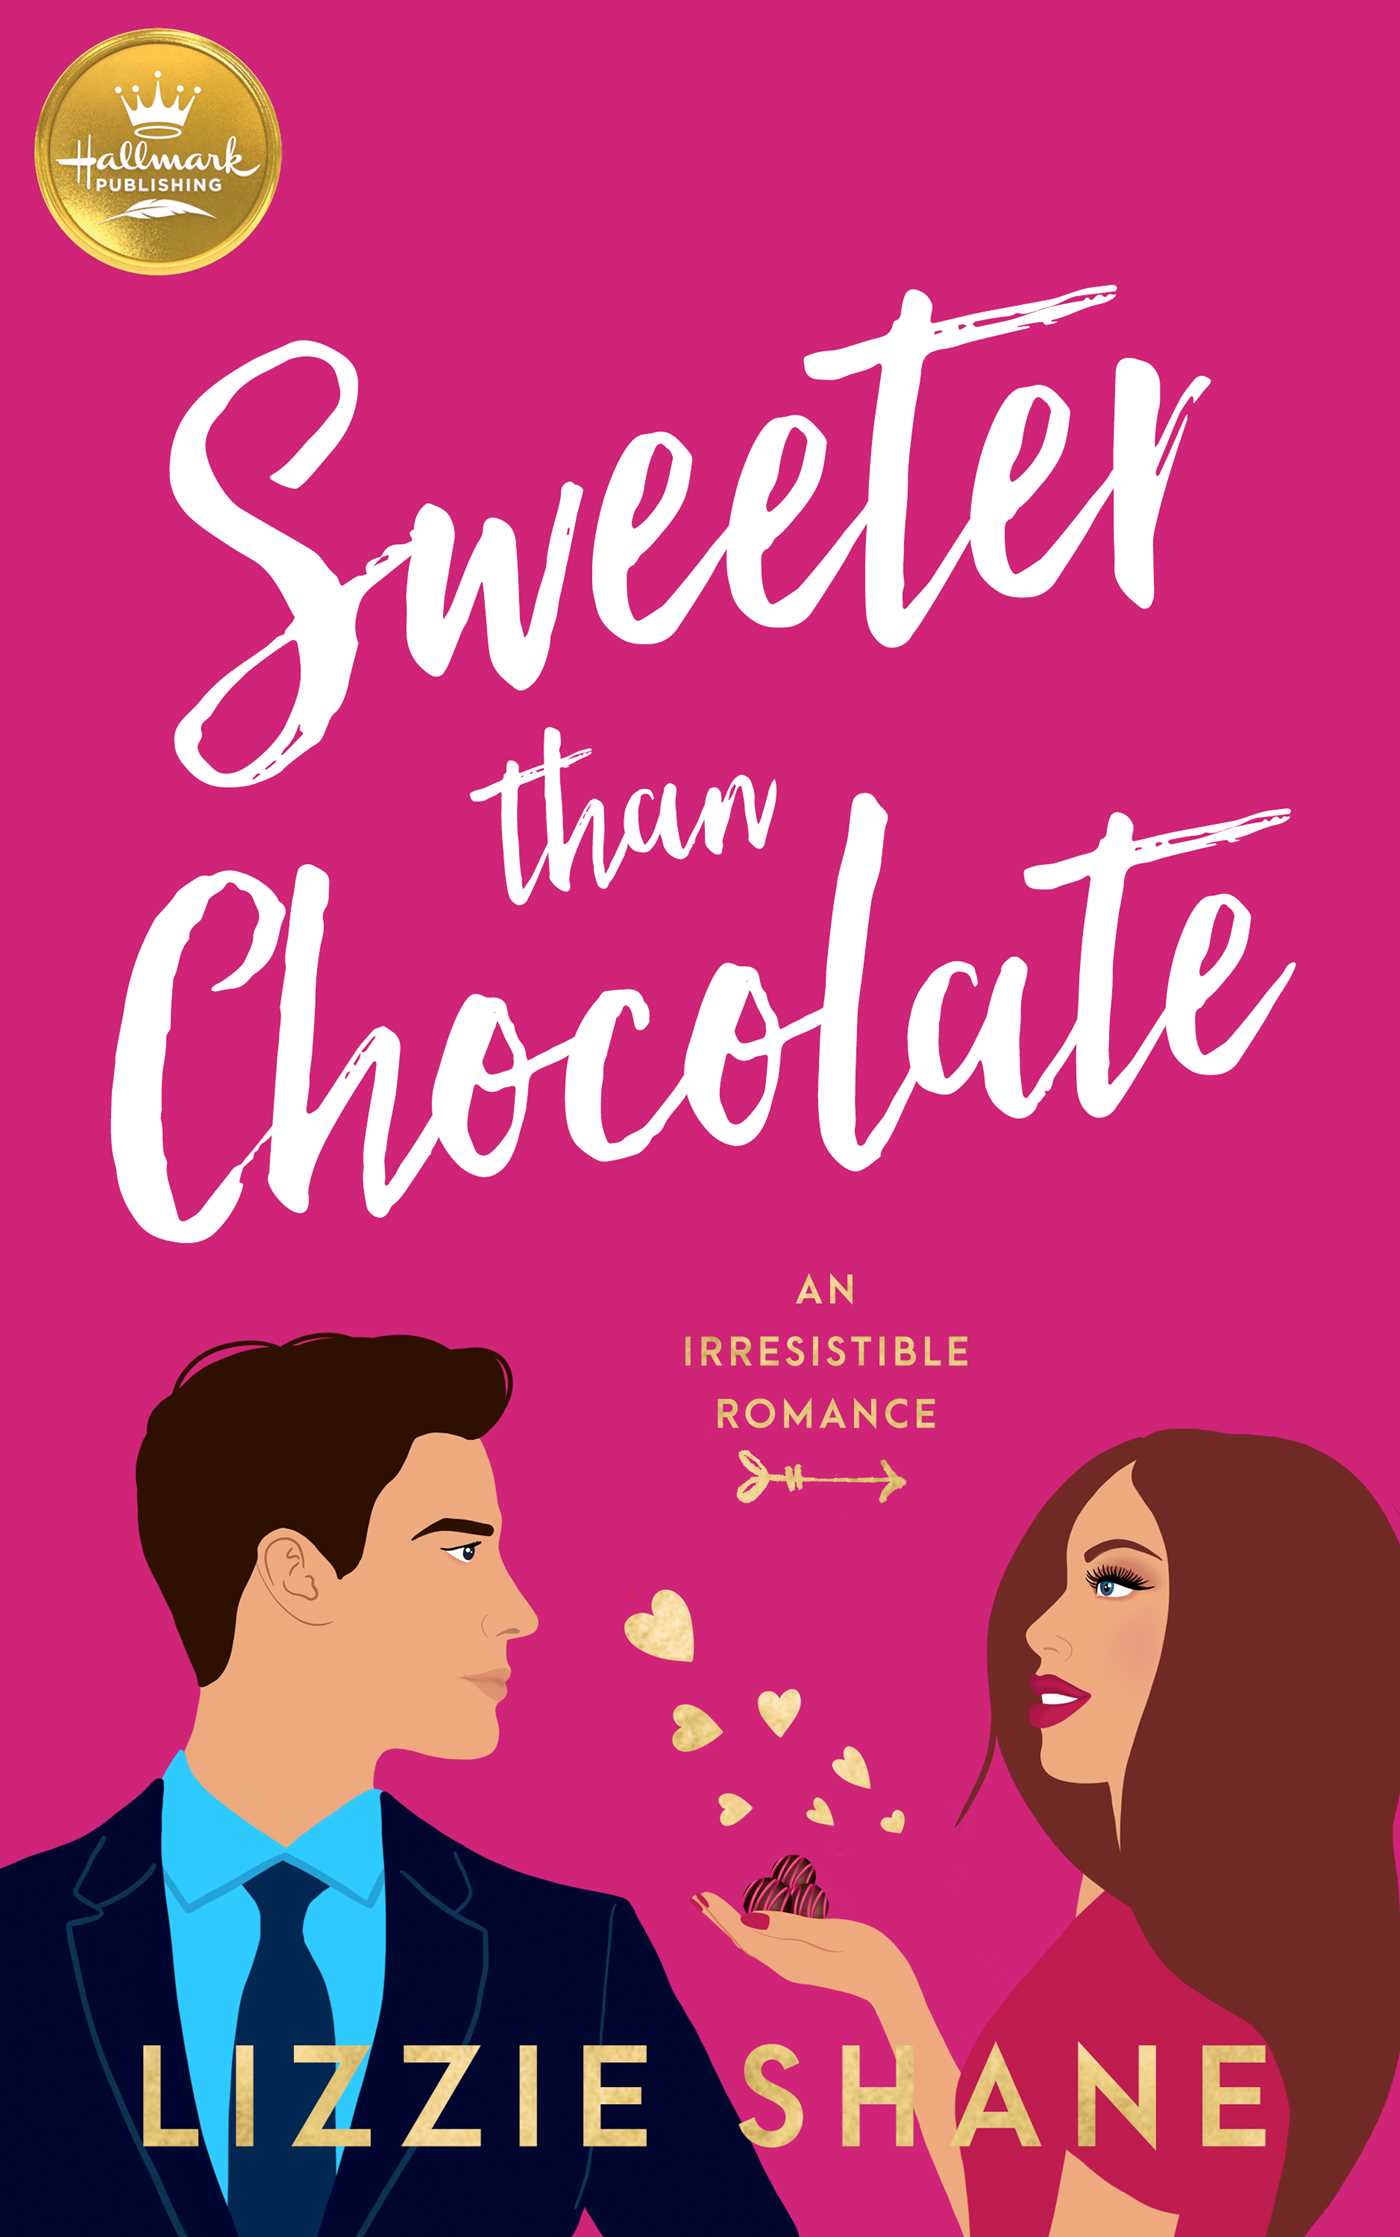 Sweeter Than Chocolate by Lizzie Shane PDF Download